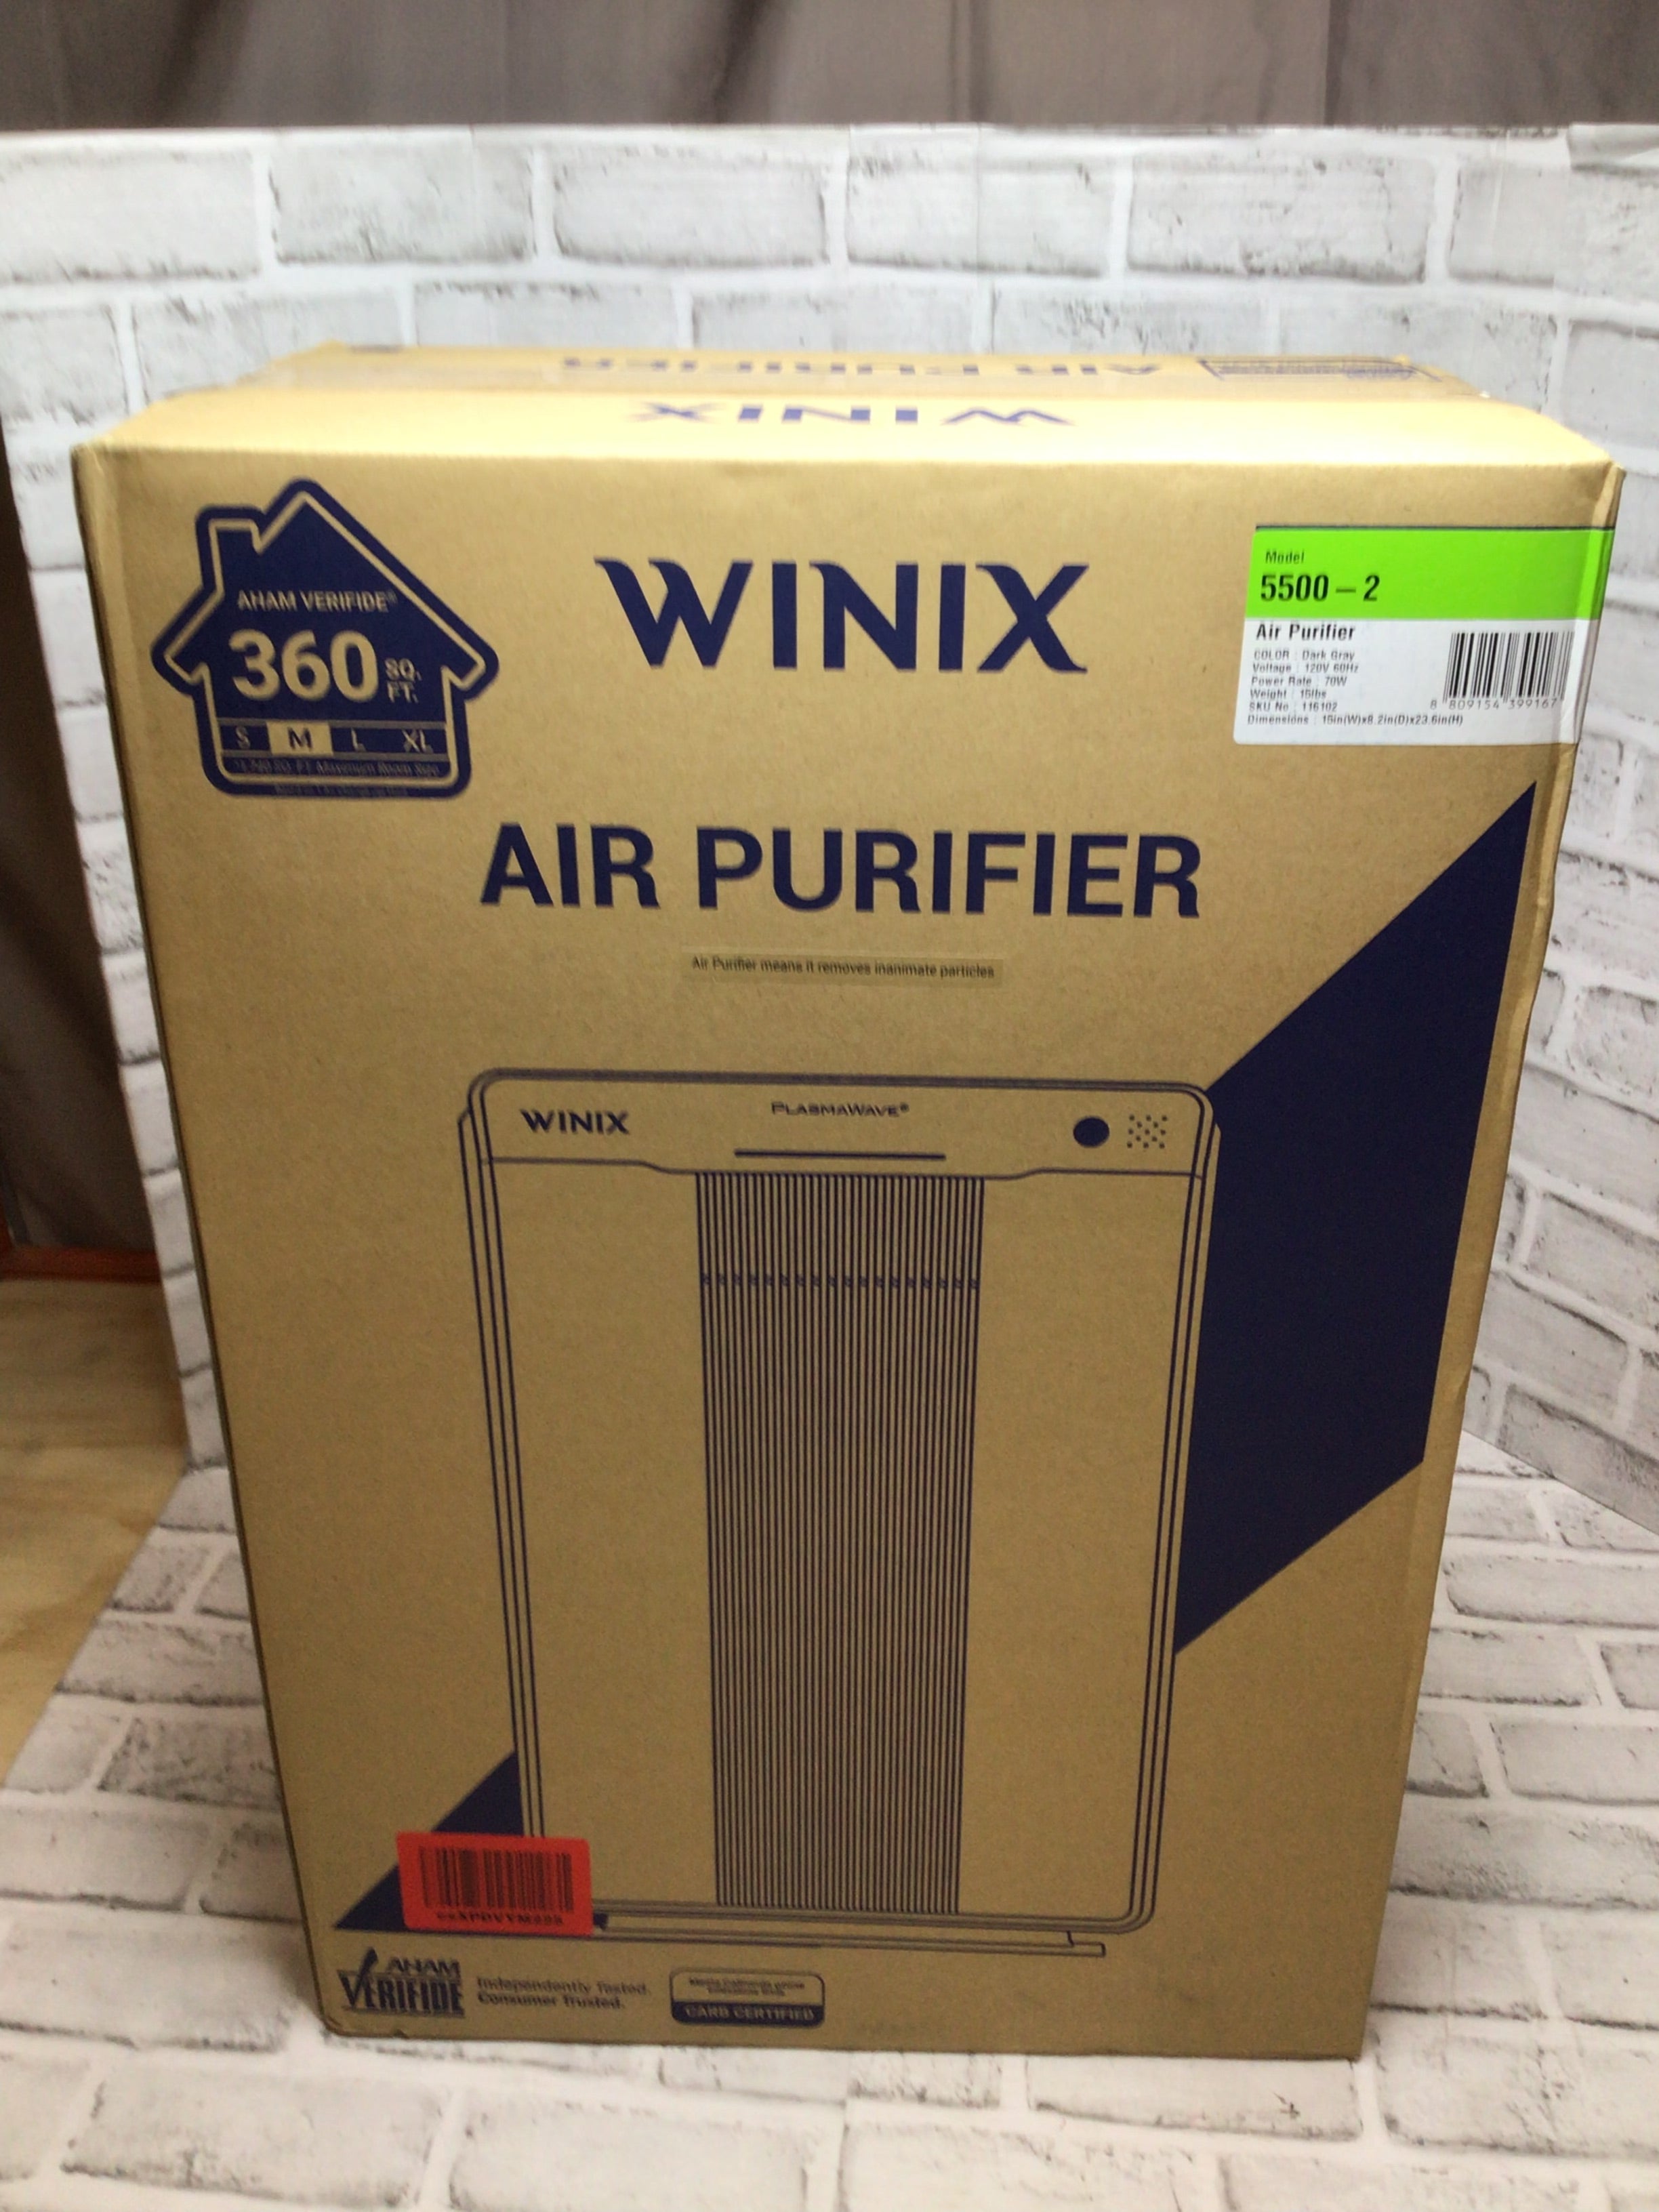 Winix 5500-2 Air Cleaner with Plasma Wave Technology and 4-stage air cleaning (8093188653294)